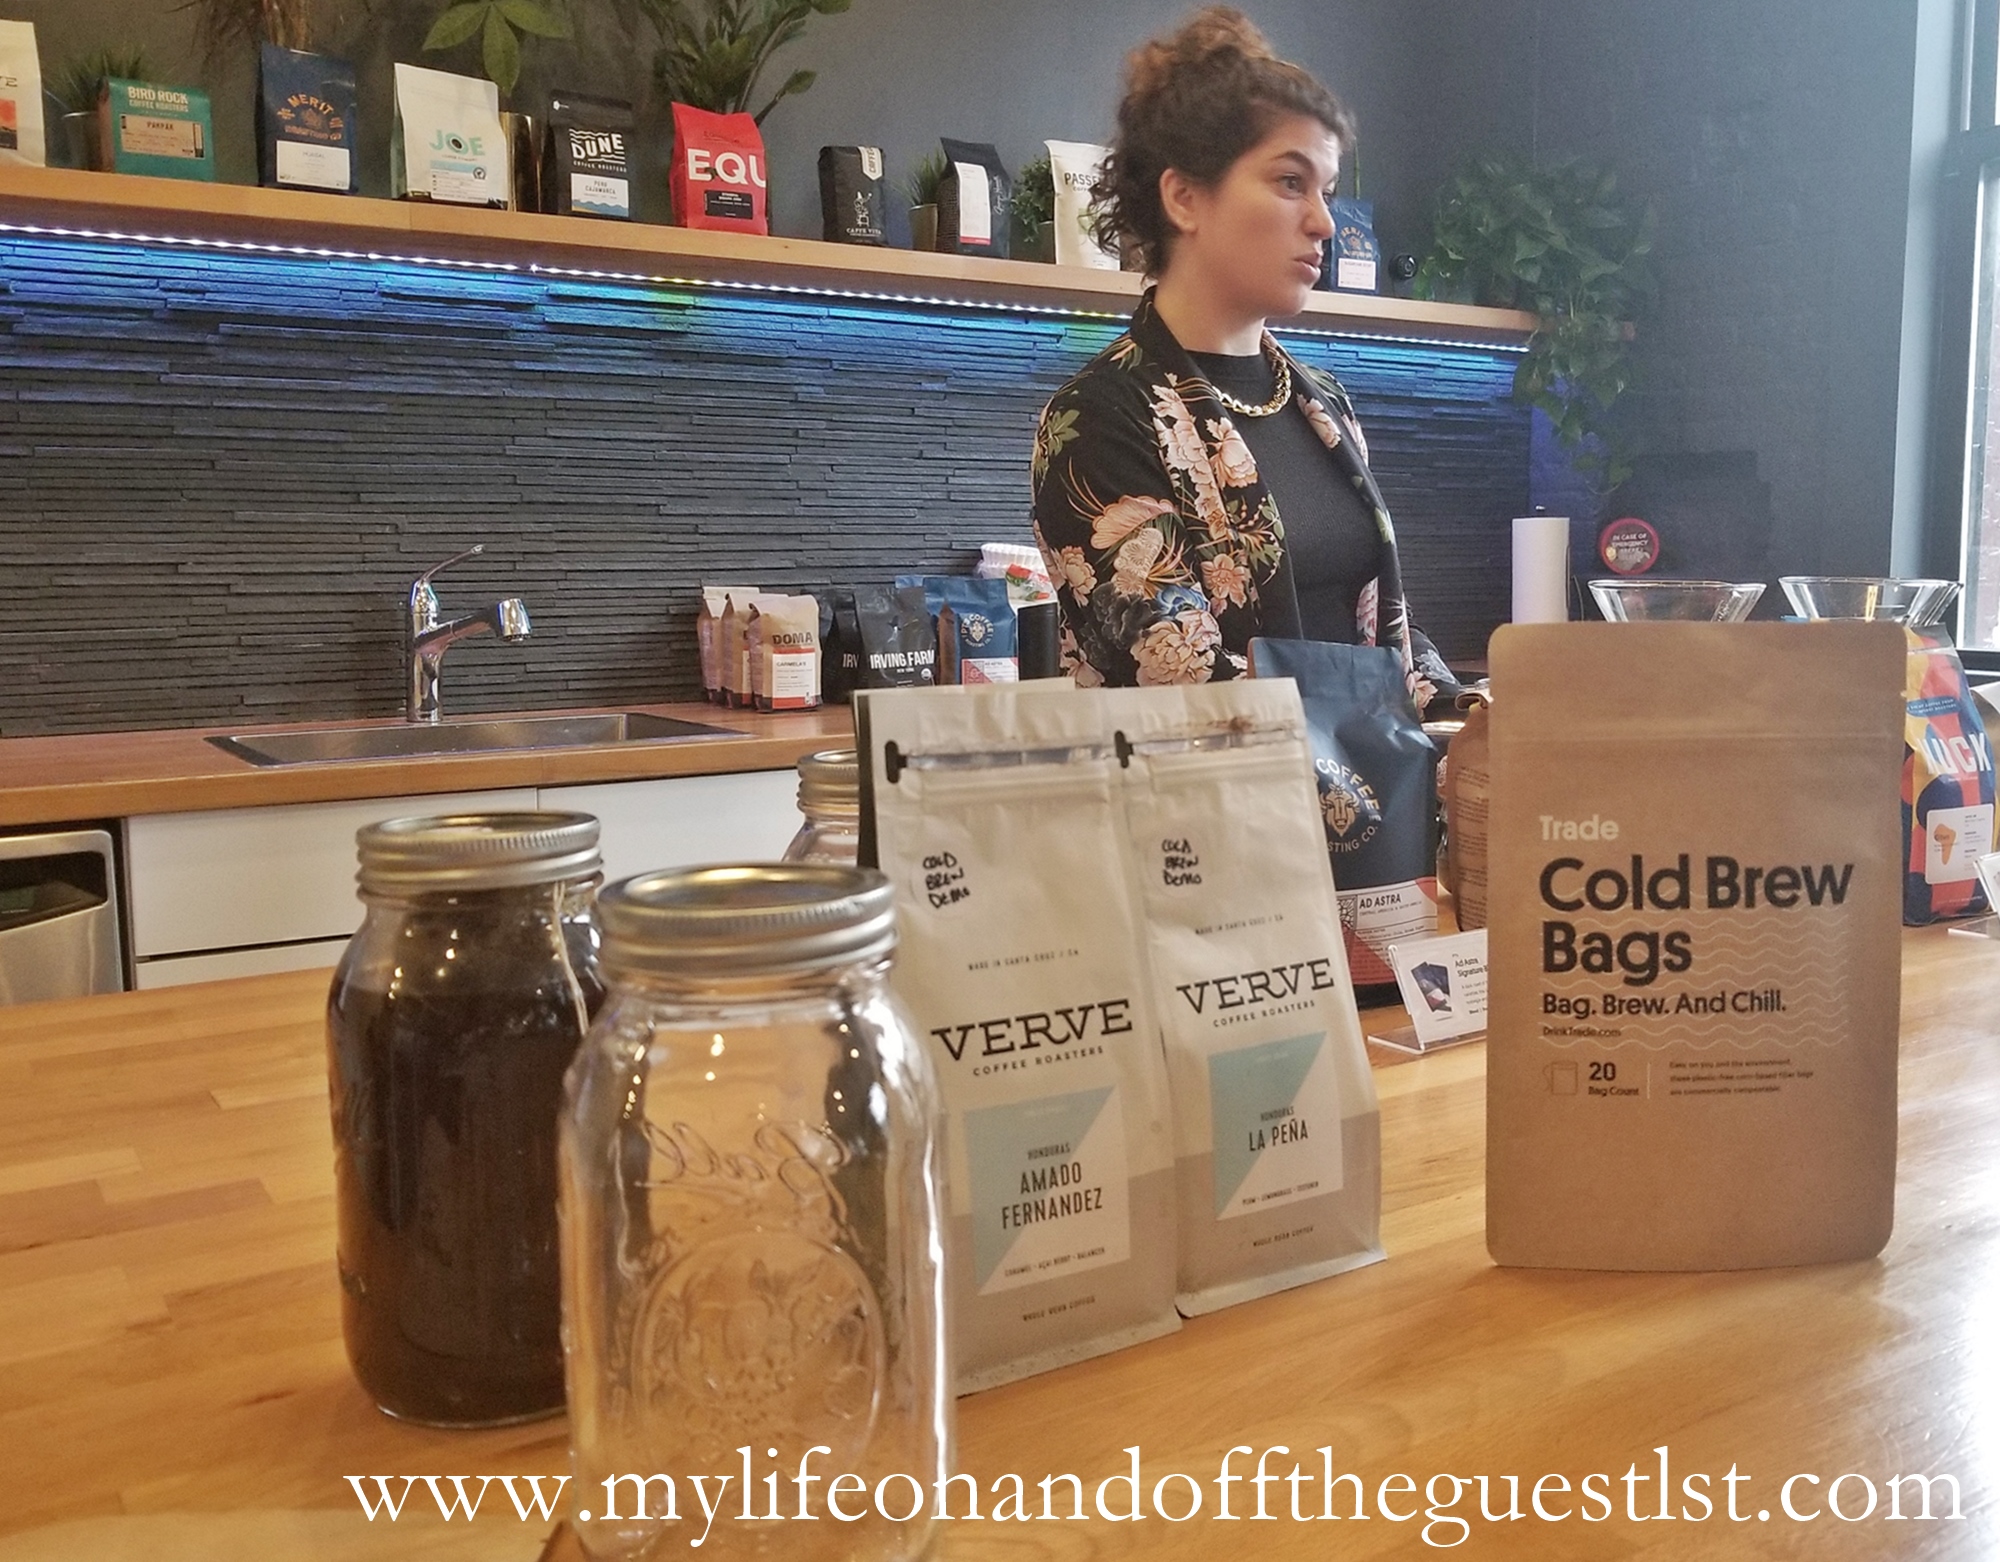 Trade Coffee Welcomes Cold Brew Bags